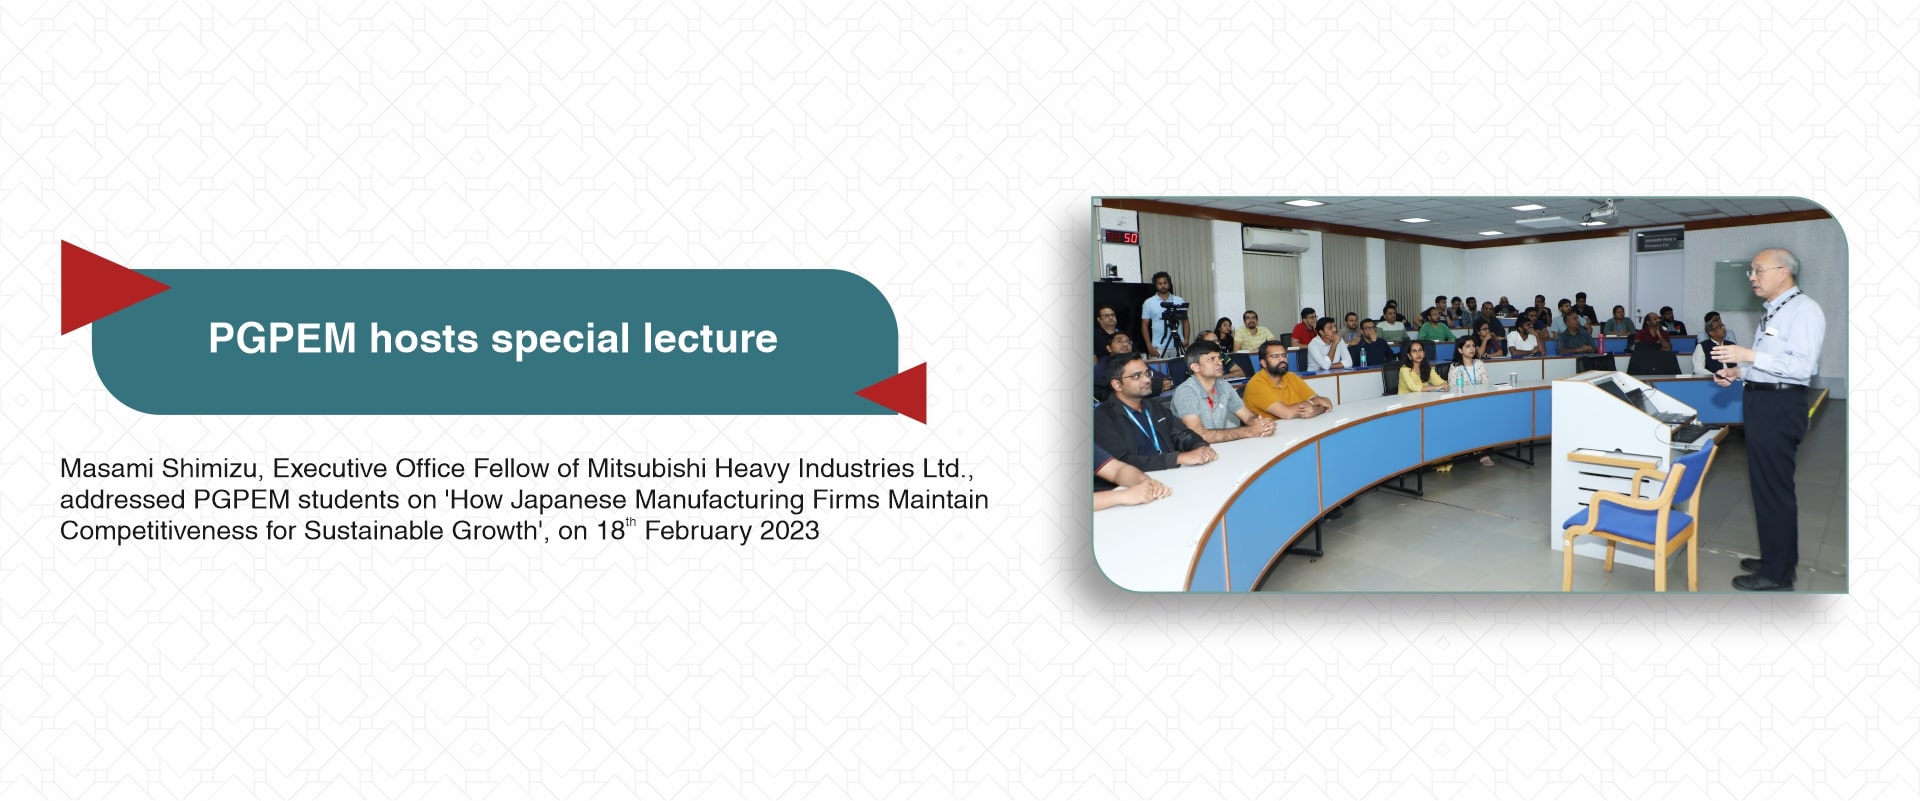 PGPEM cohort hosts talk on ‘How Japanese Manufacturing Firms Maintain Competitiveness for Sustainable Growth’ on 18th Feb